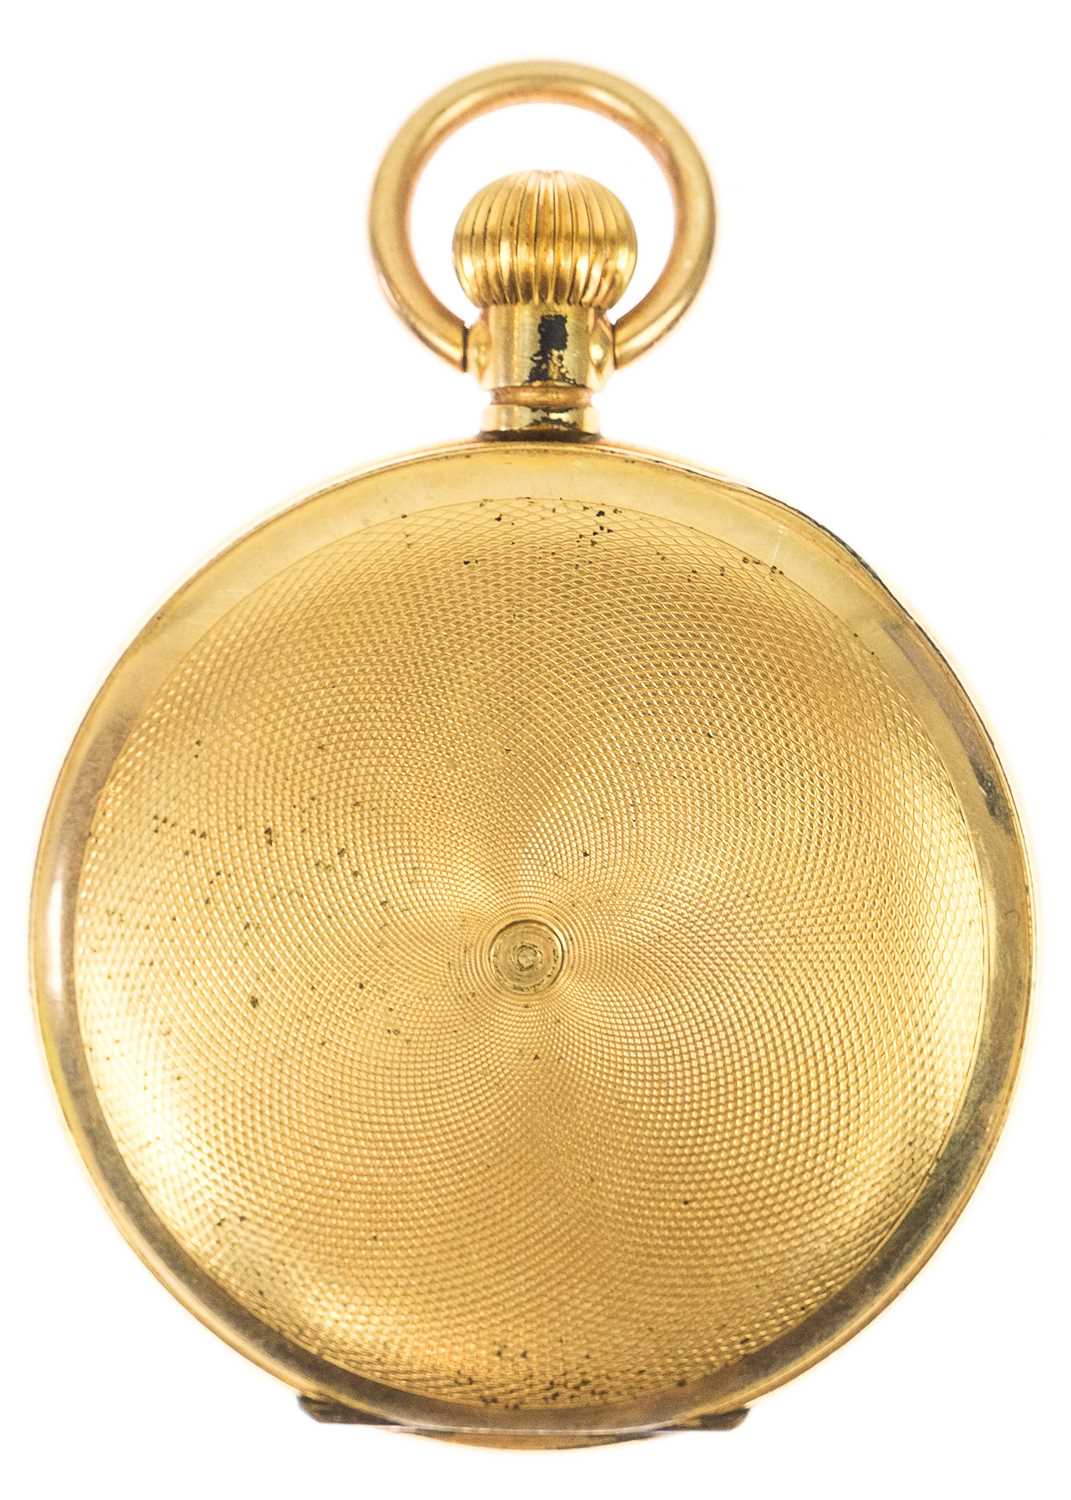 A gold-plated full hunter crown wind pocket watch by Rotary. - Image 3 of 5